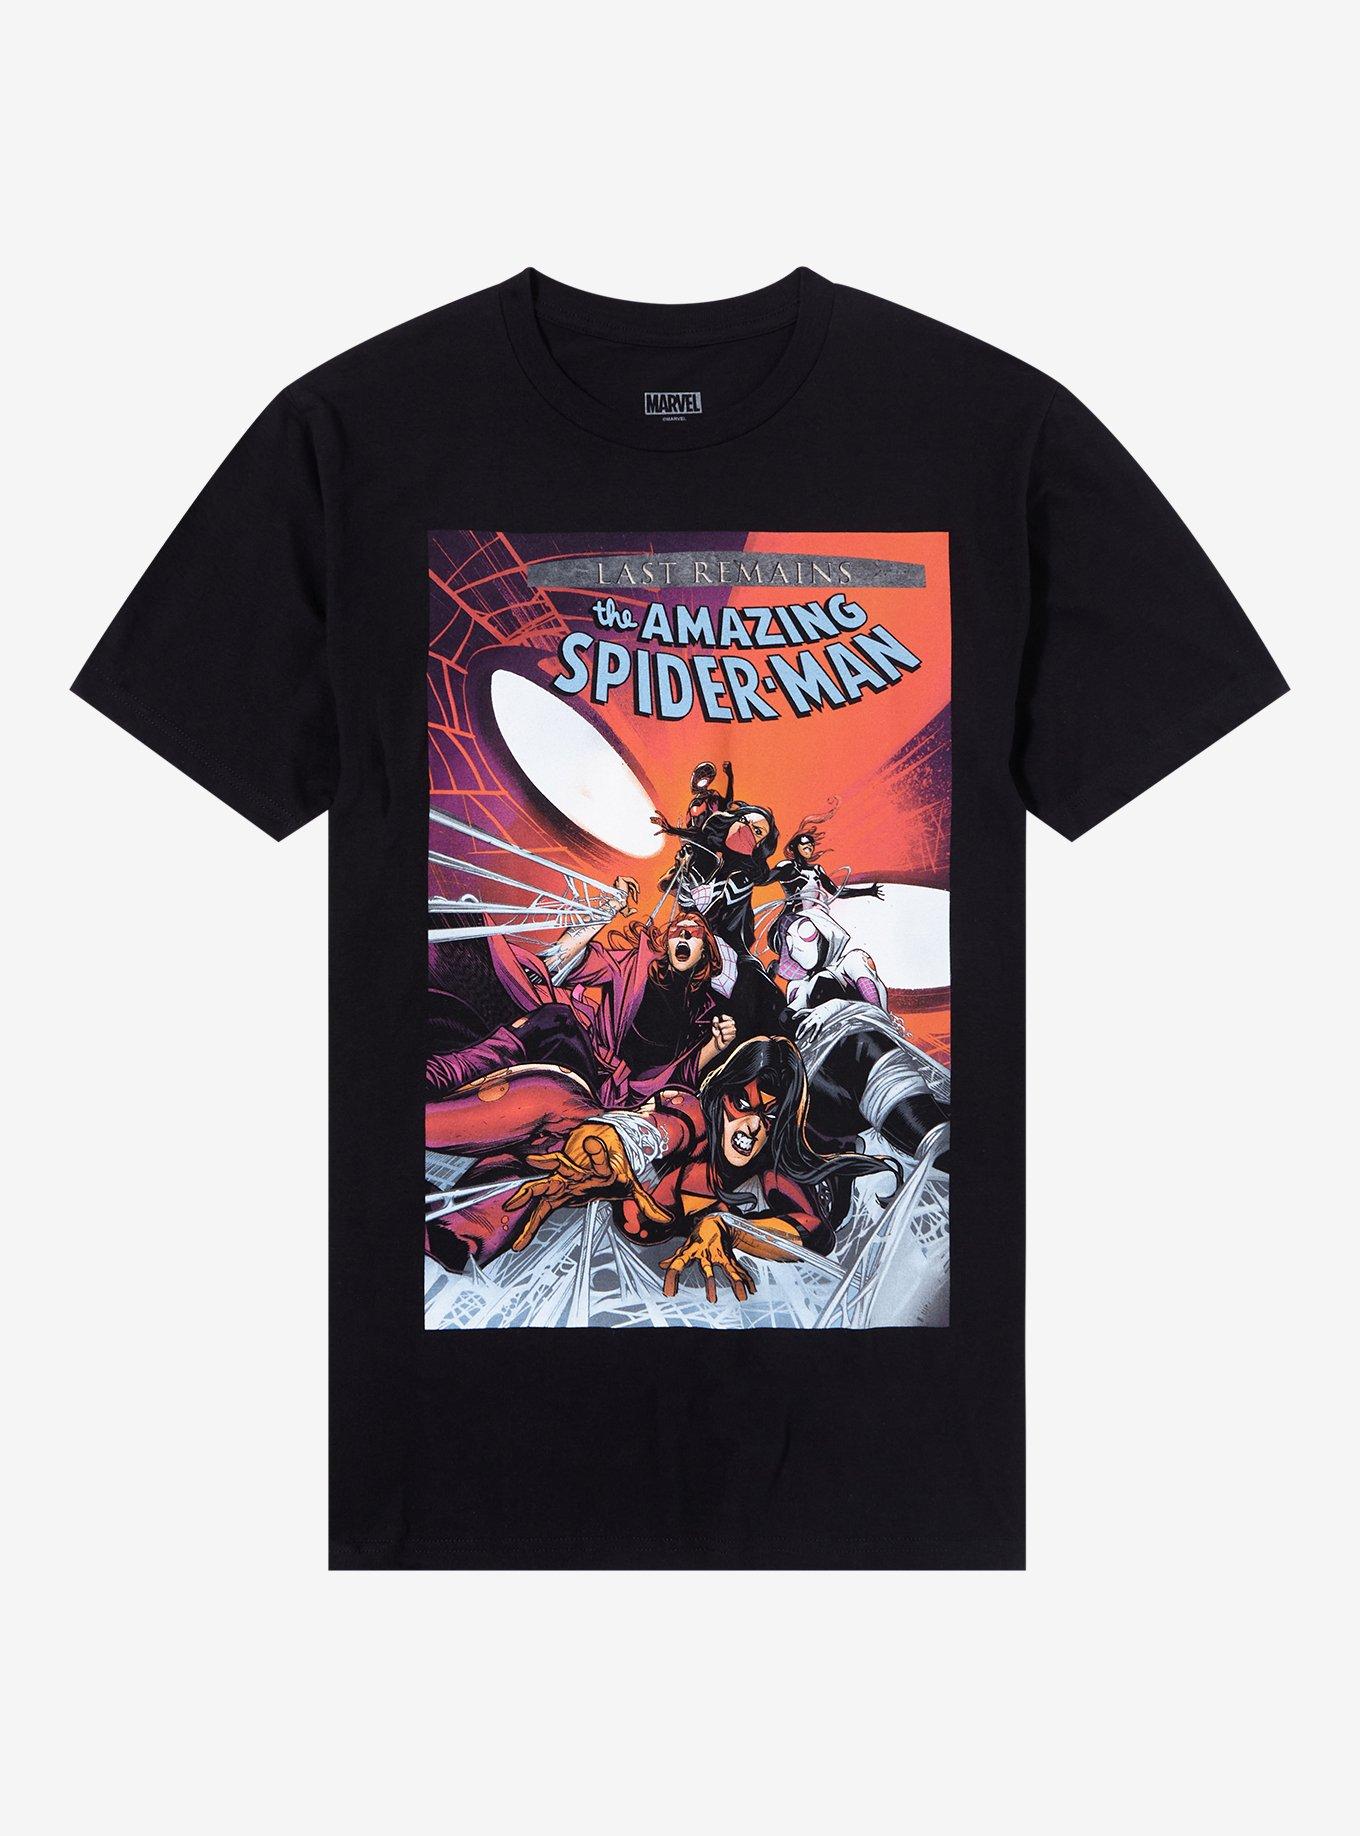 Marvel The Amazing Spider-Man Last Remains Comic Cover T-Shirt | Hot Topic